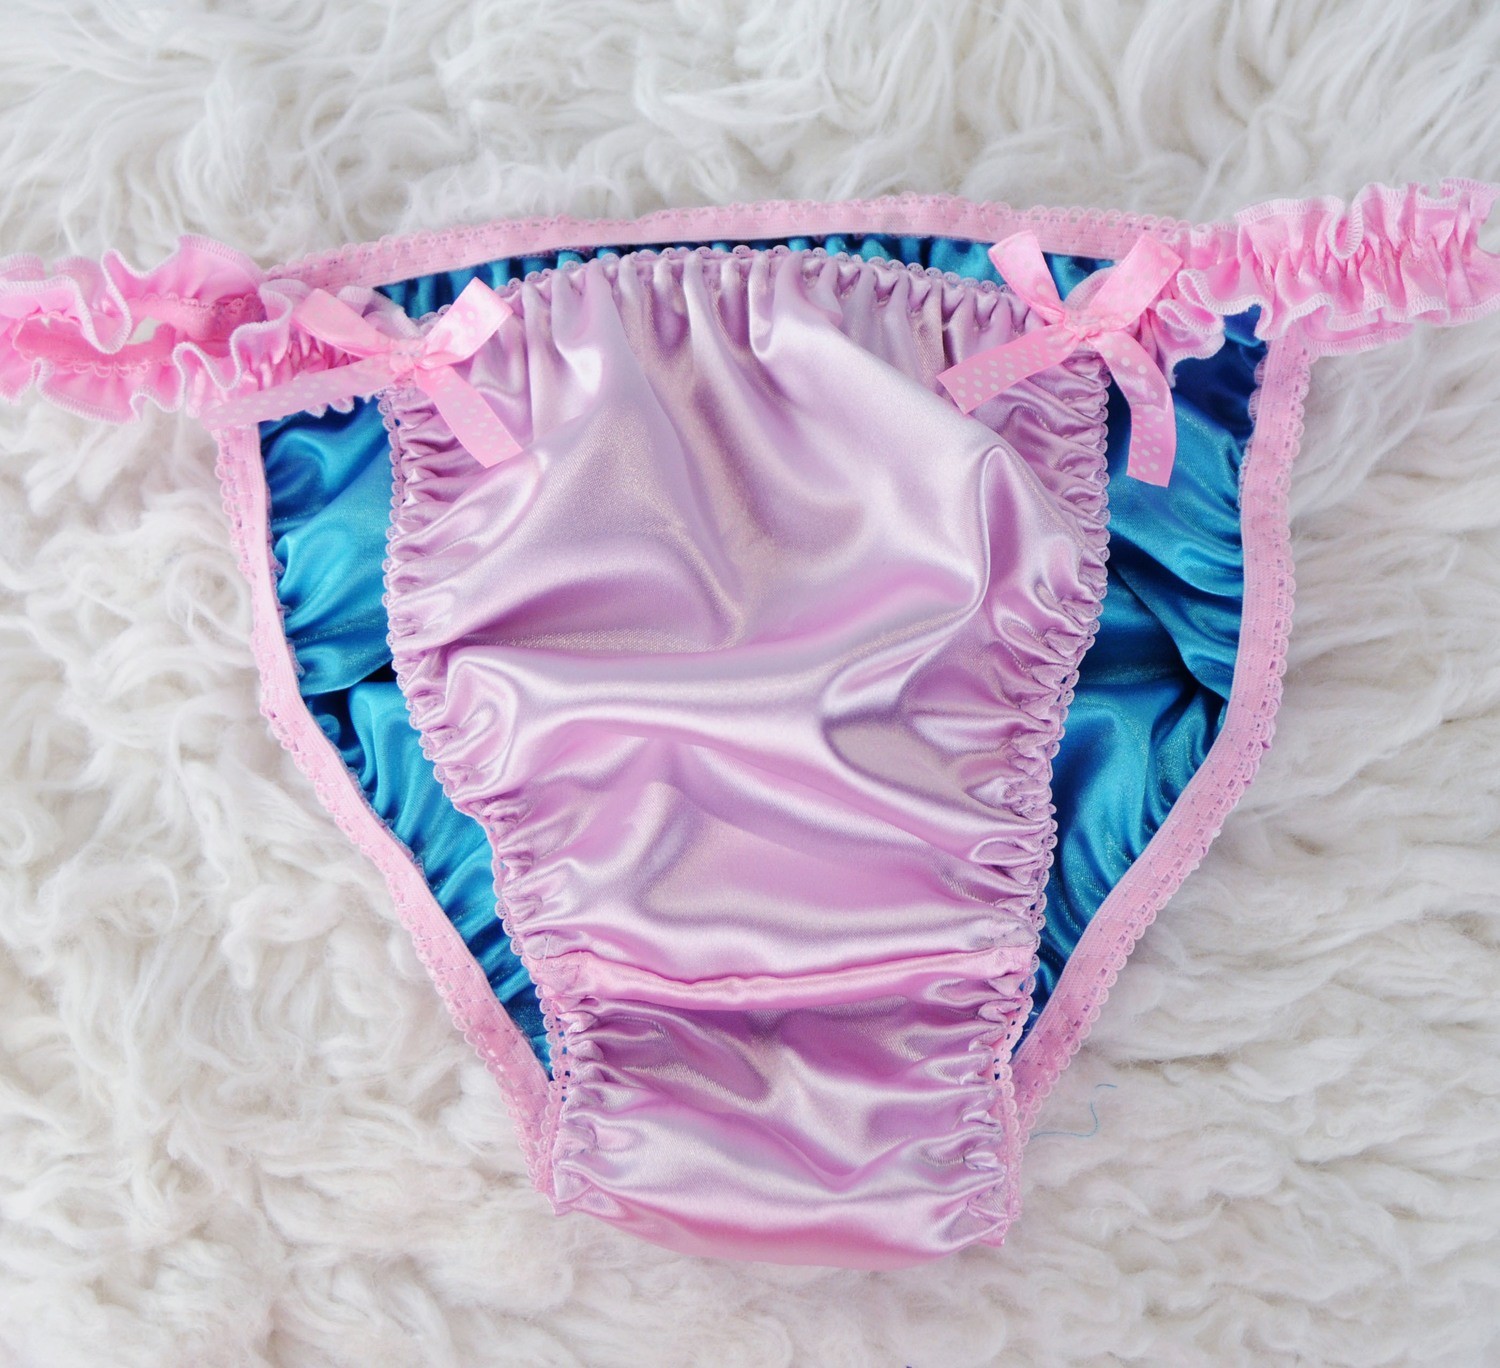 Exclusive Ania's Poison MANties Silky Smooth, Butter Soft Double Lined Pink Blue Limited Edition bikini panties like Joe the Boxer for Sissy MEN!